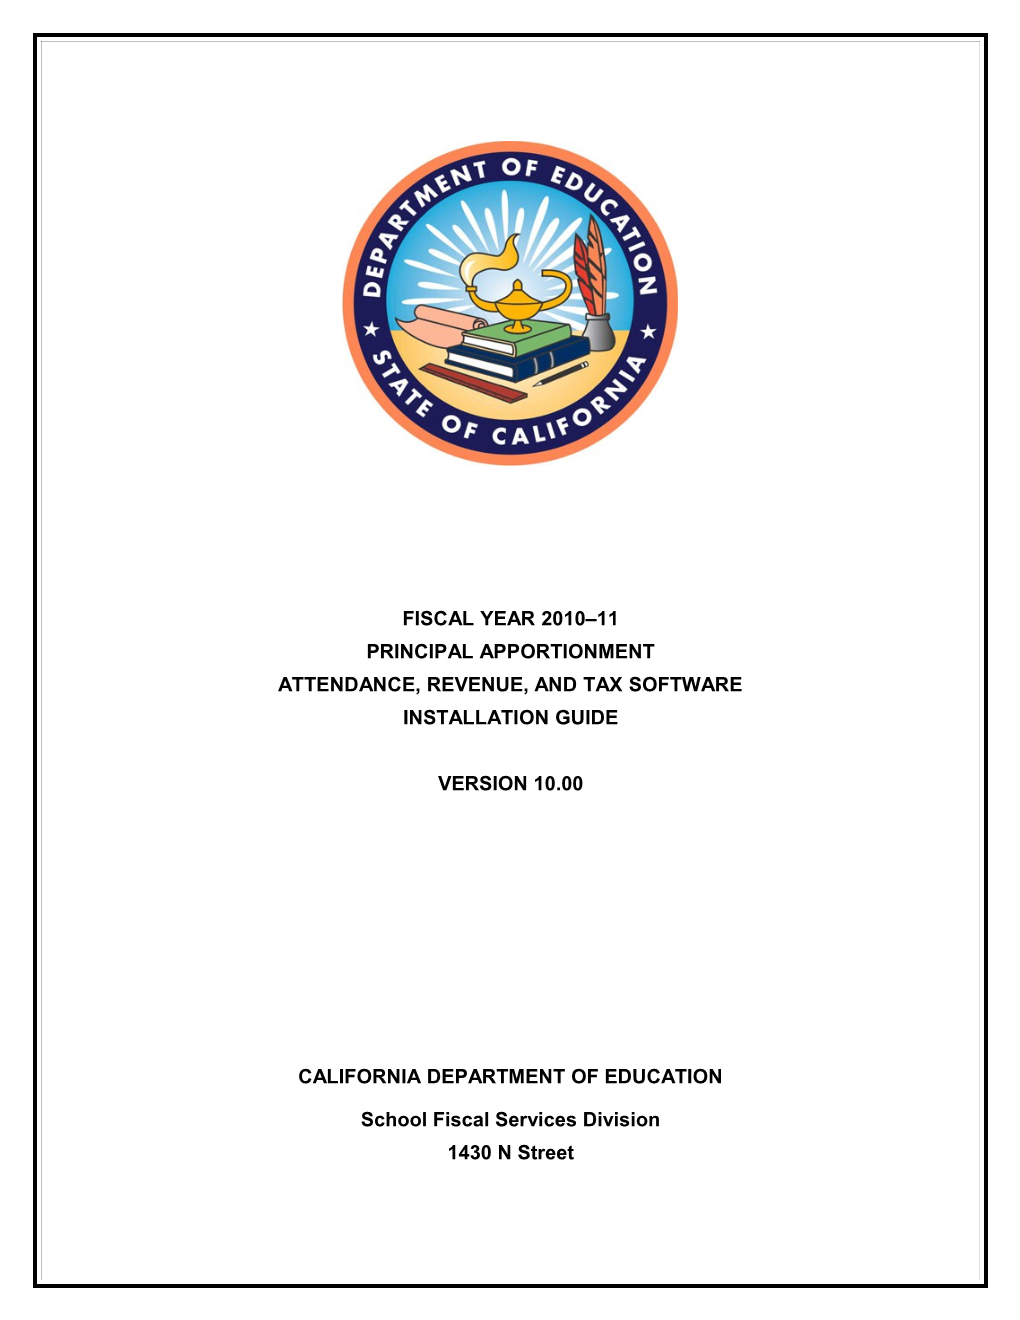 PA Software Install Guide, FY 2010-11 - Principal Apportionment (CA Dept of Education)